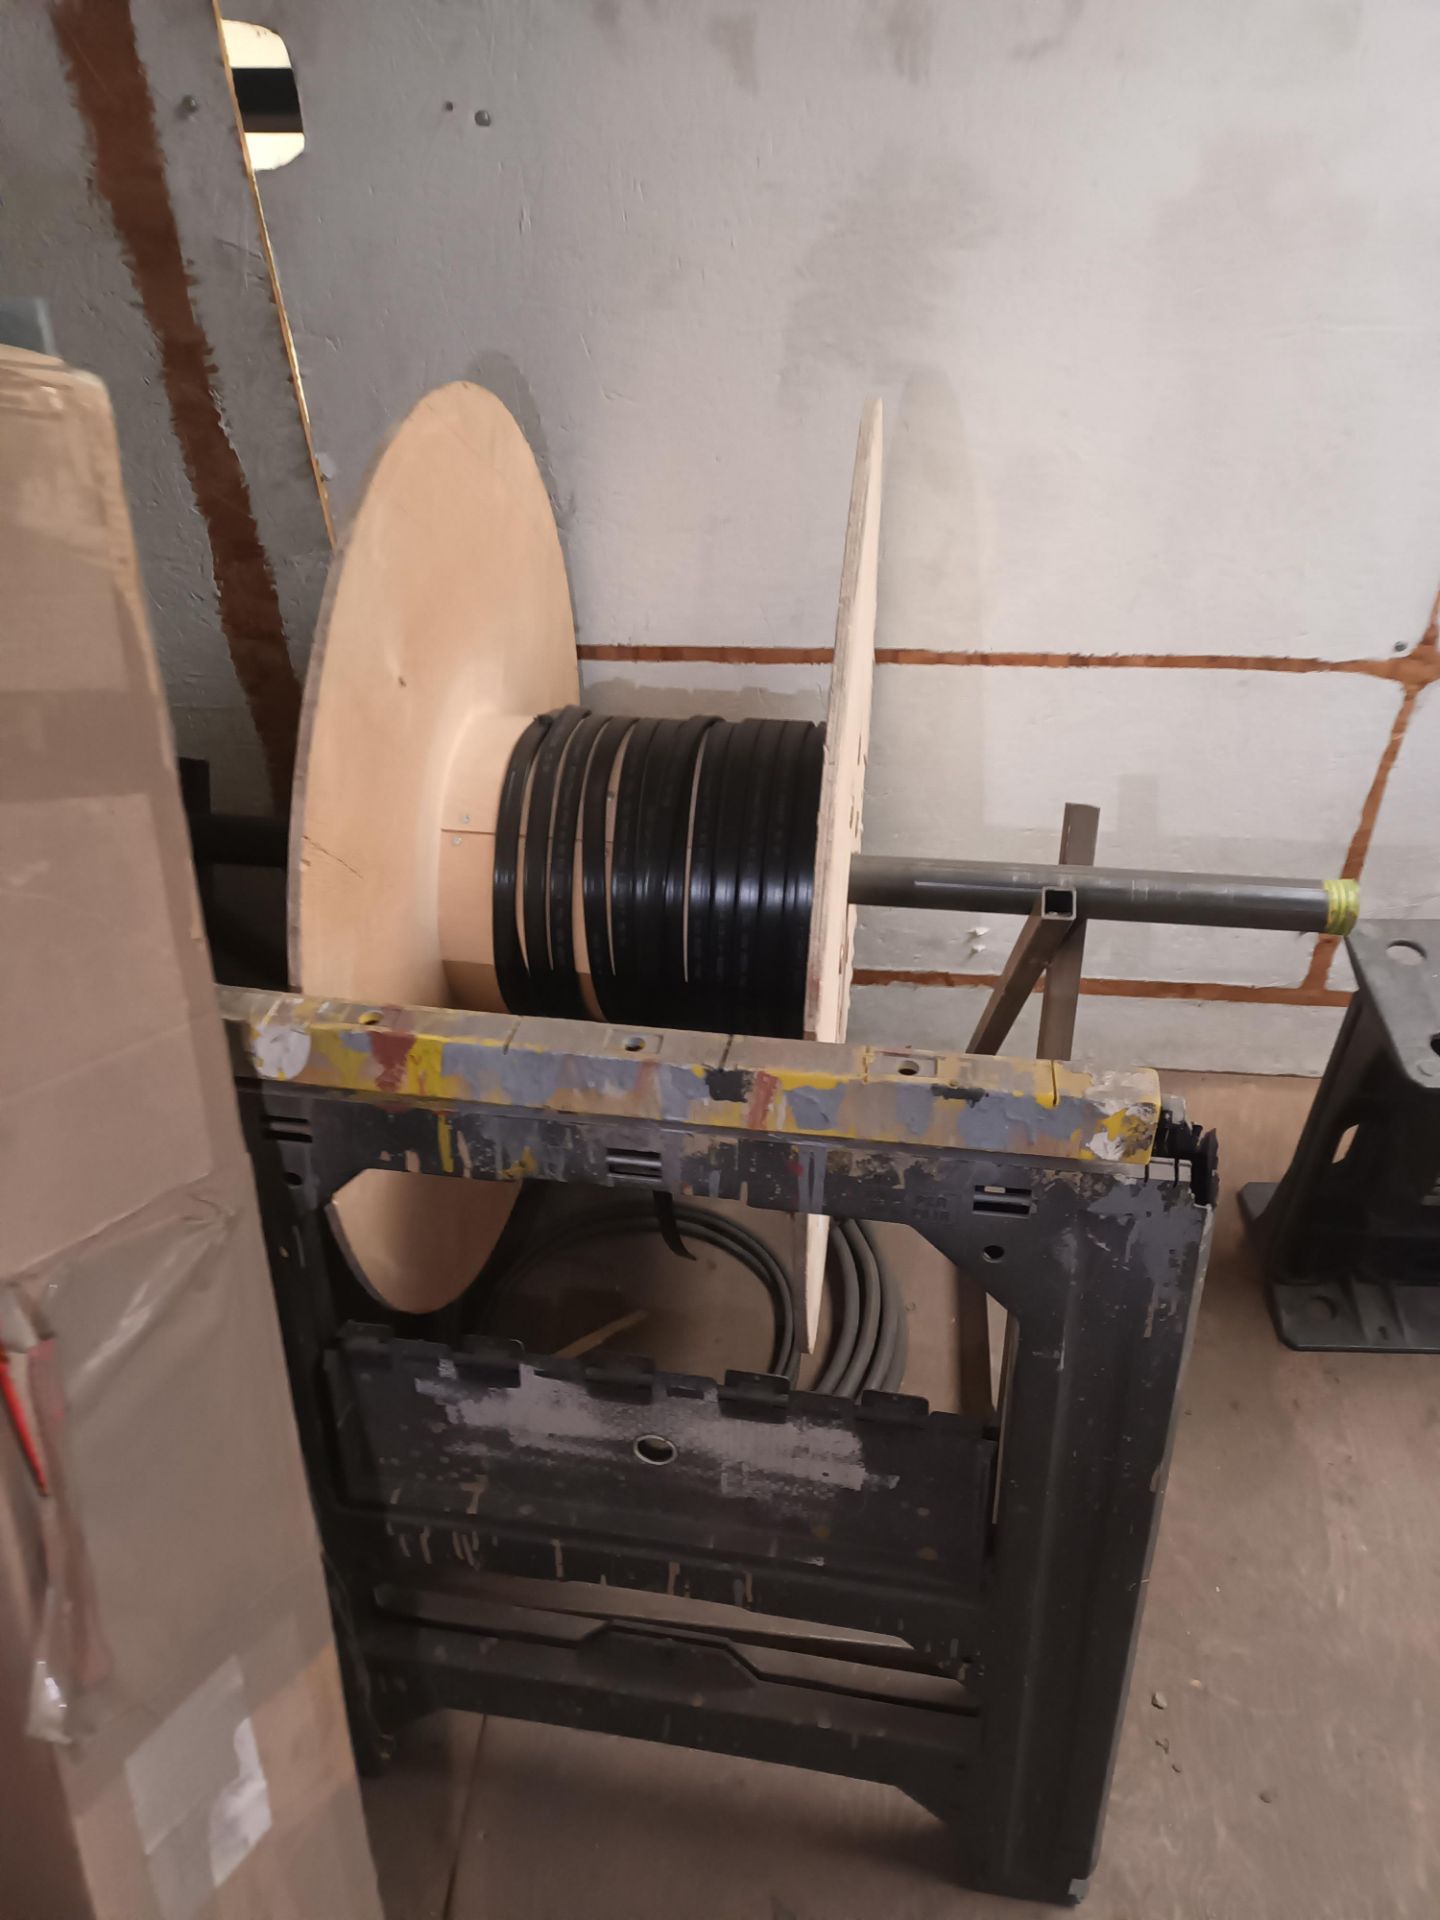 Contents of upstairs stock room to include large quantity of various wire insulation tape, adaptable - Image 16 of 17